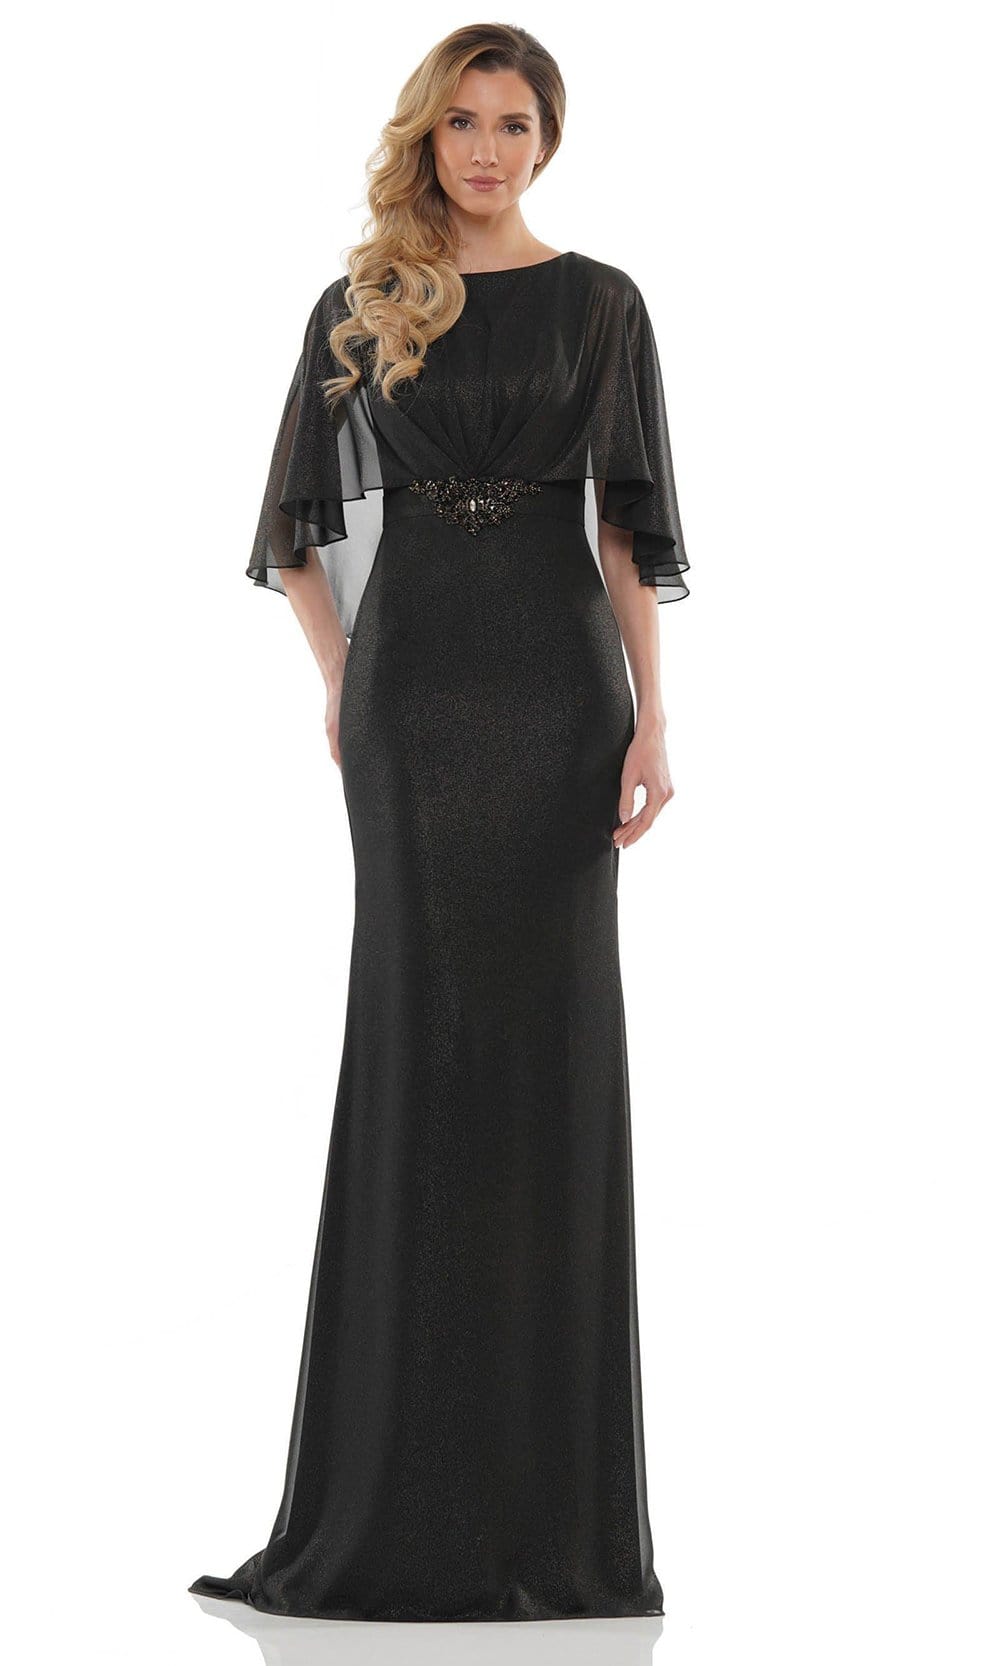 Image of Marsoni by Colors - MV1130 Glittered Fabric Poncho Sheath Gown